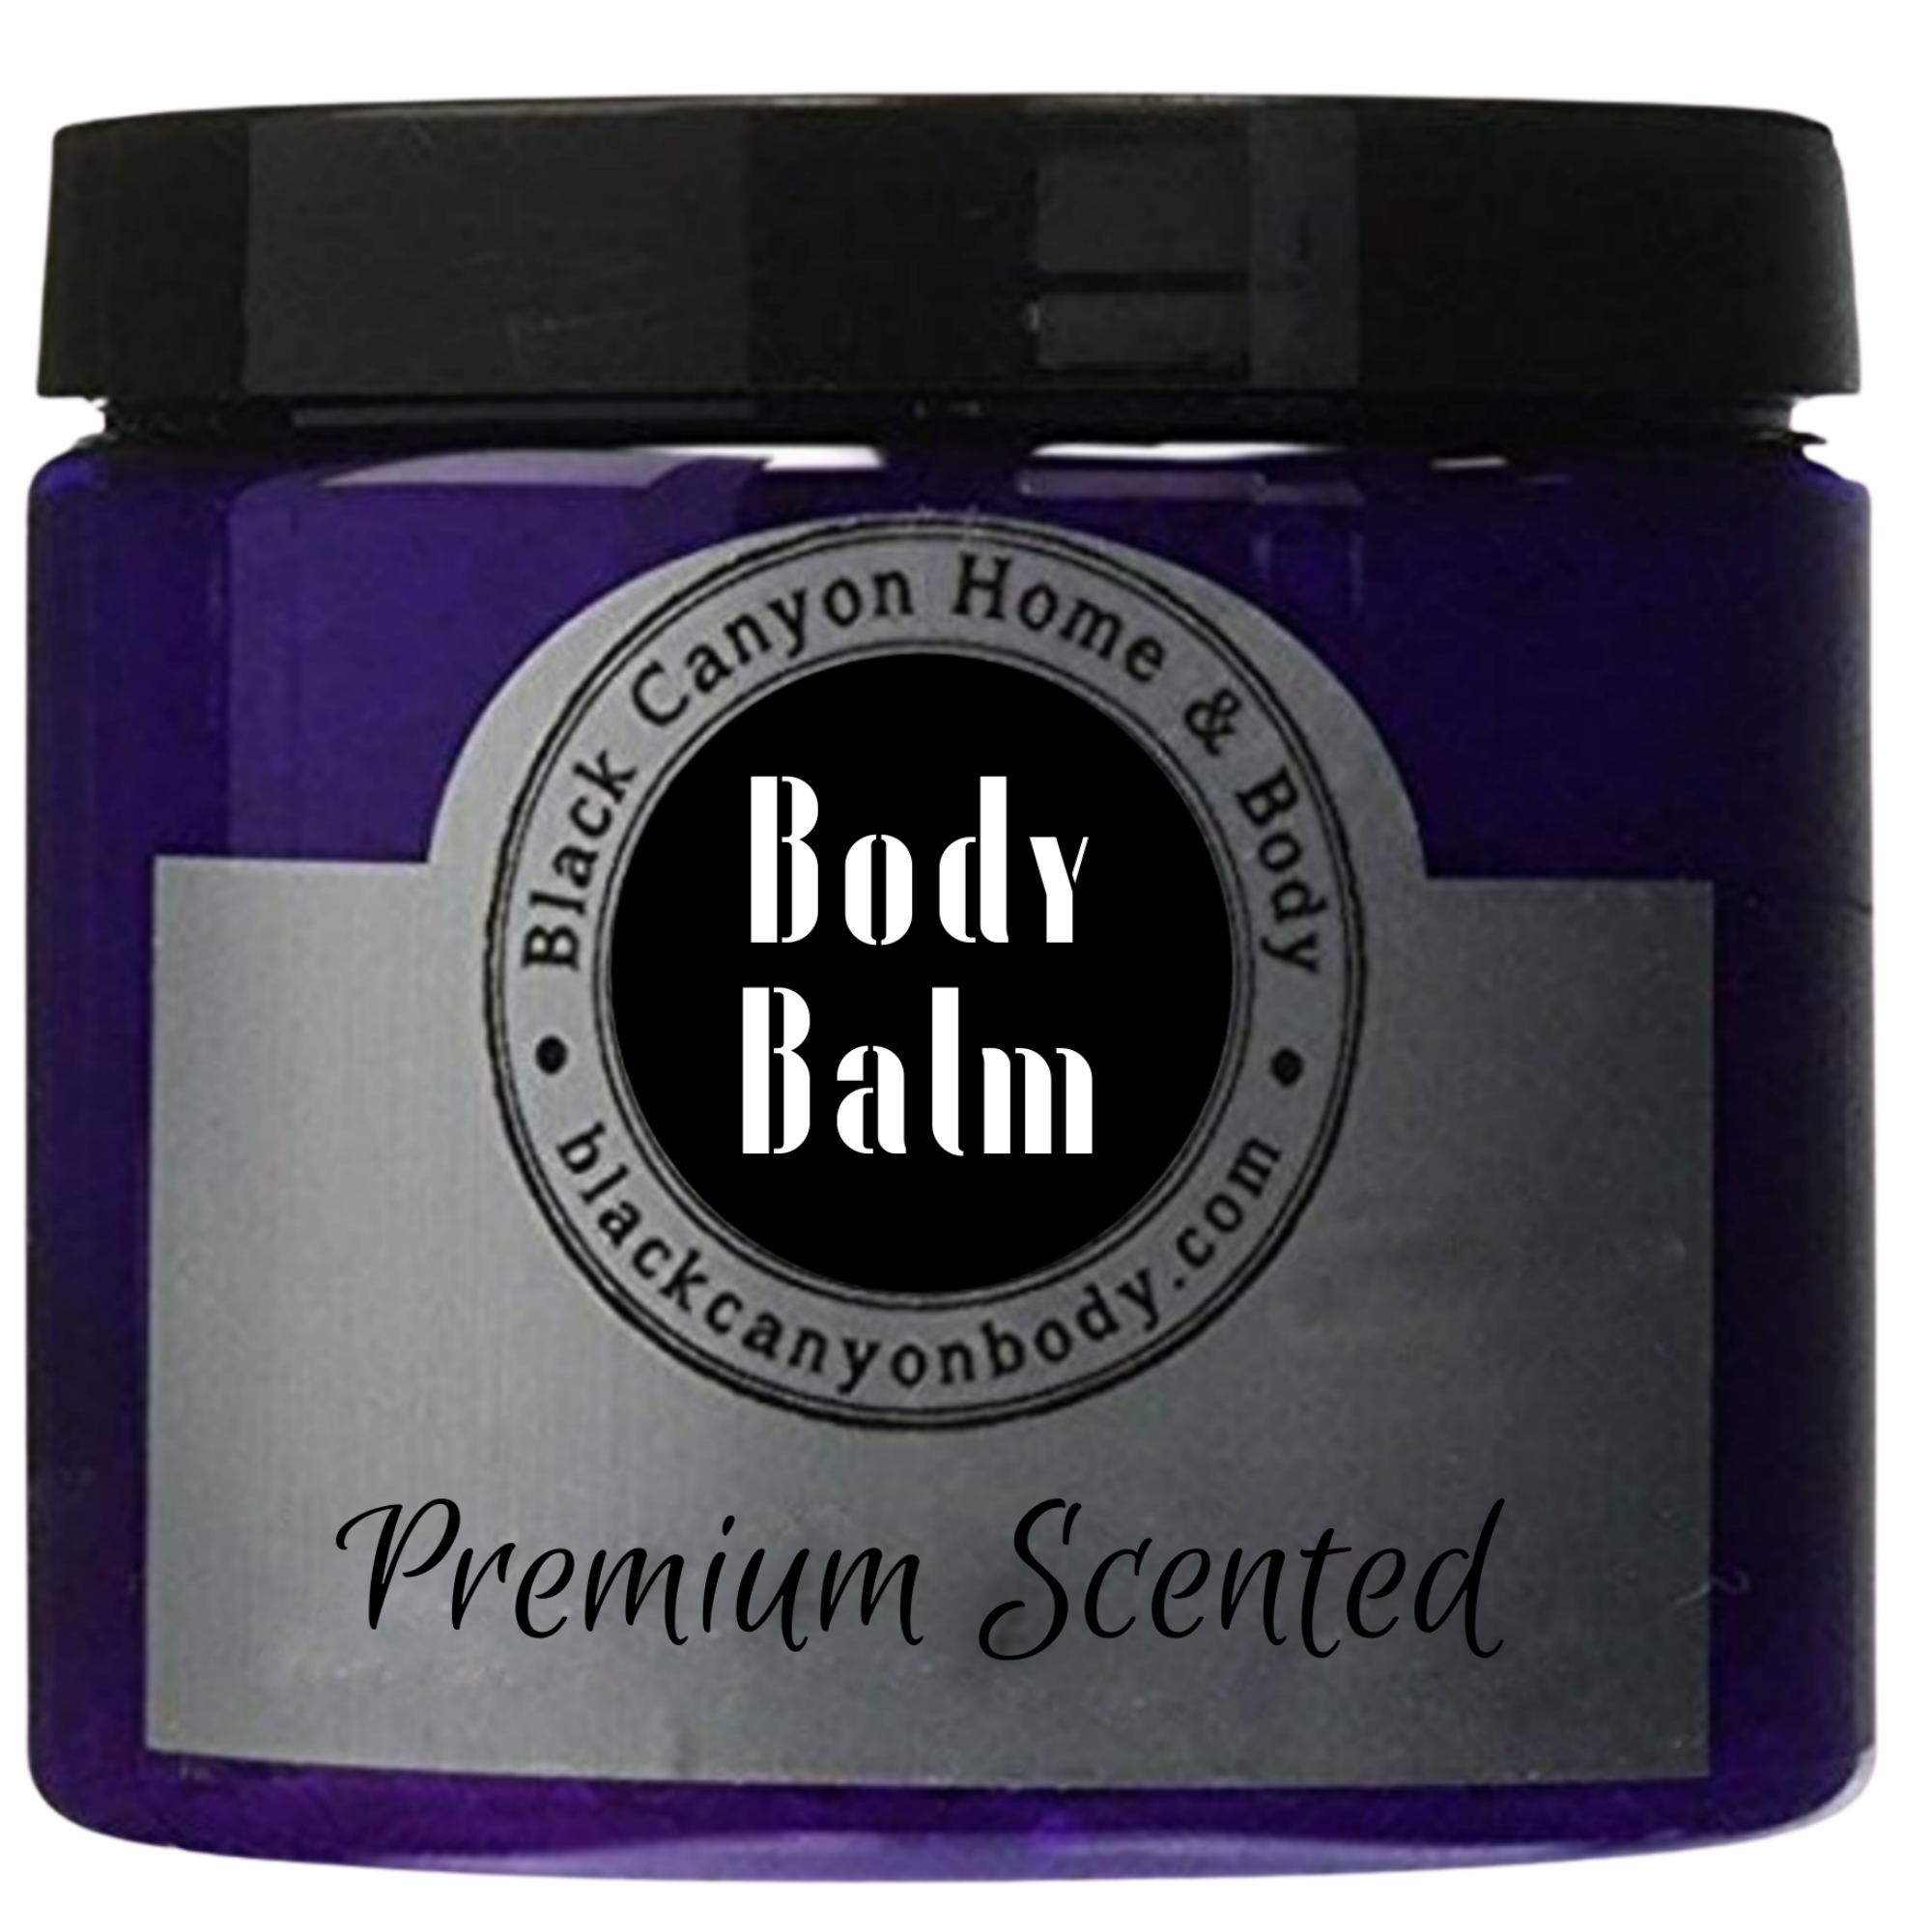 Black Canyon Myrrh & Patchouli Scented Natural Body Balm with Shea